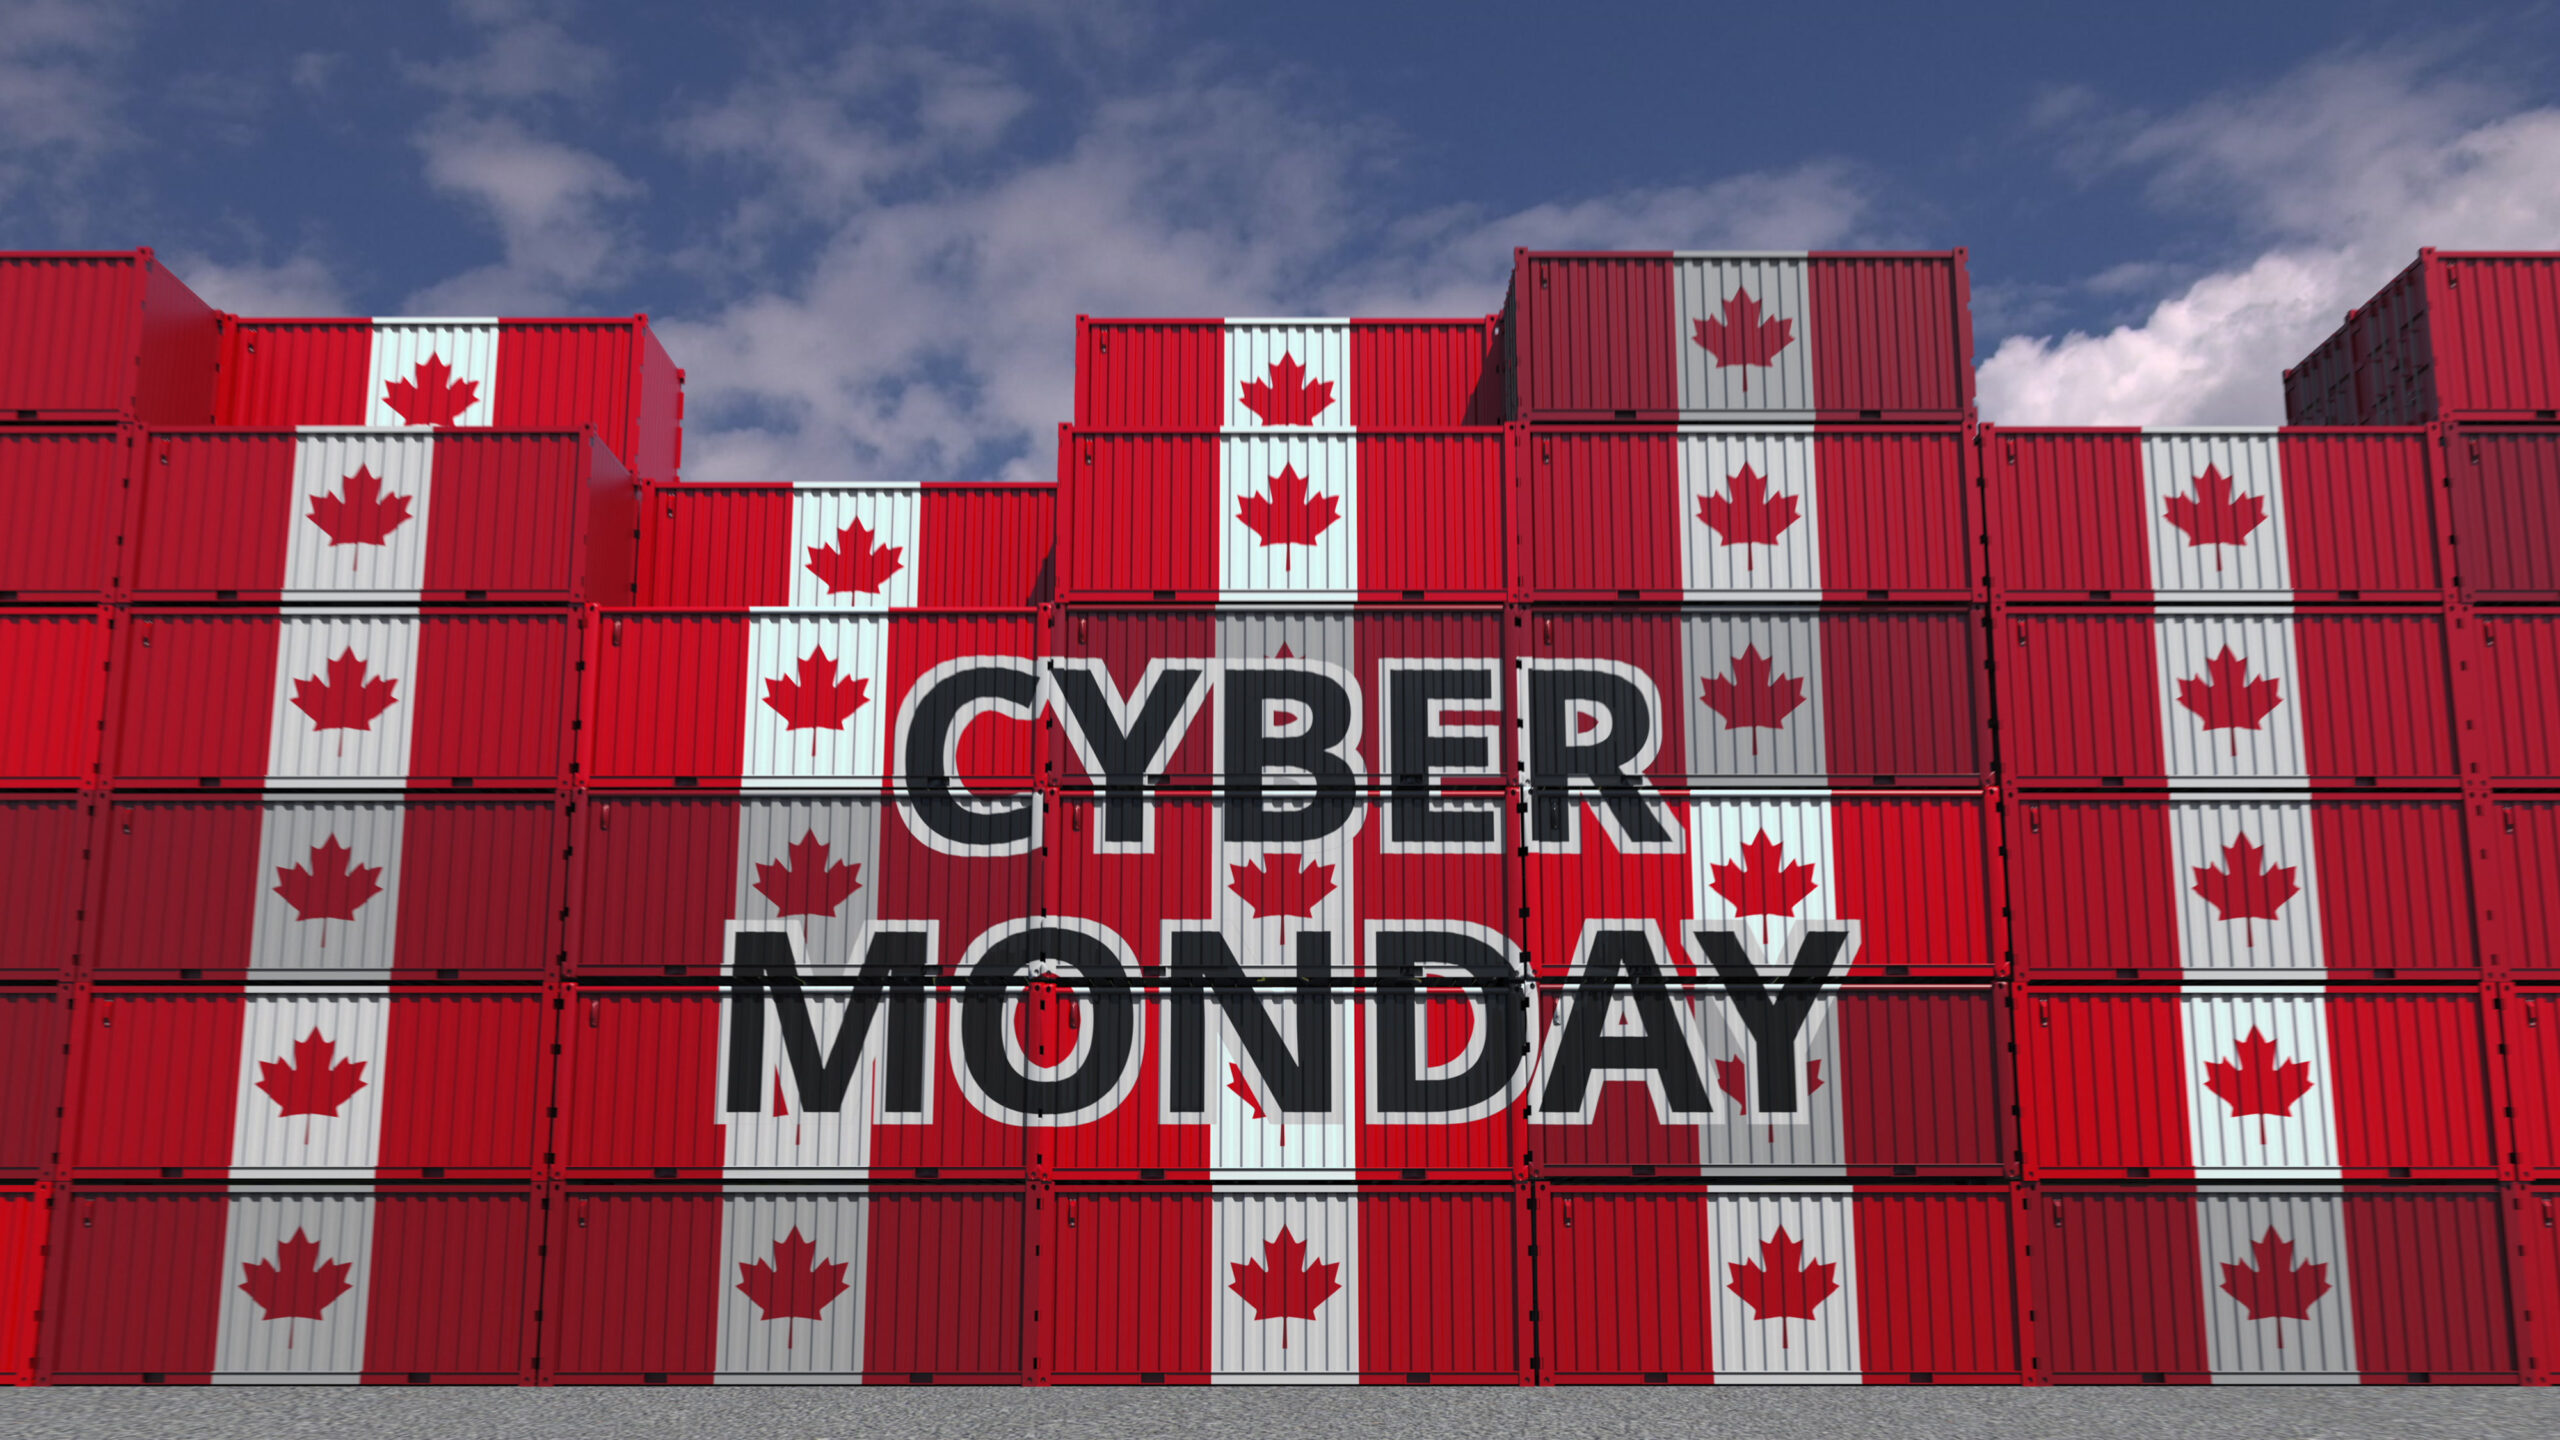 Here are the best Cyber Monday deals in Canada